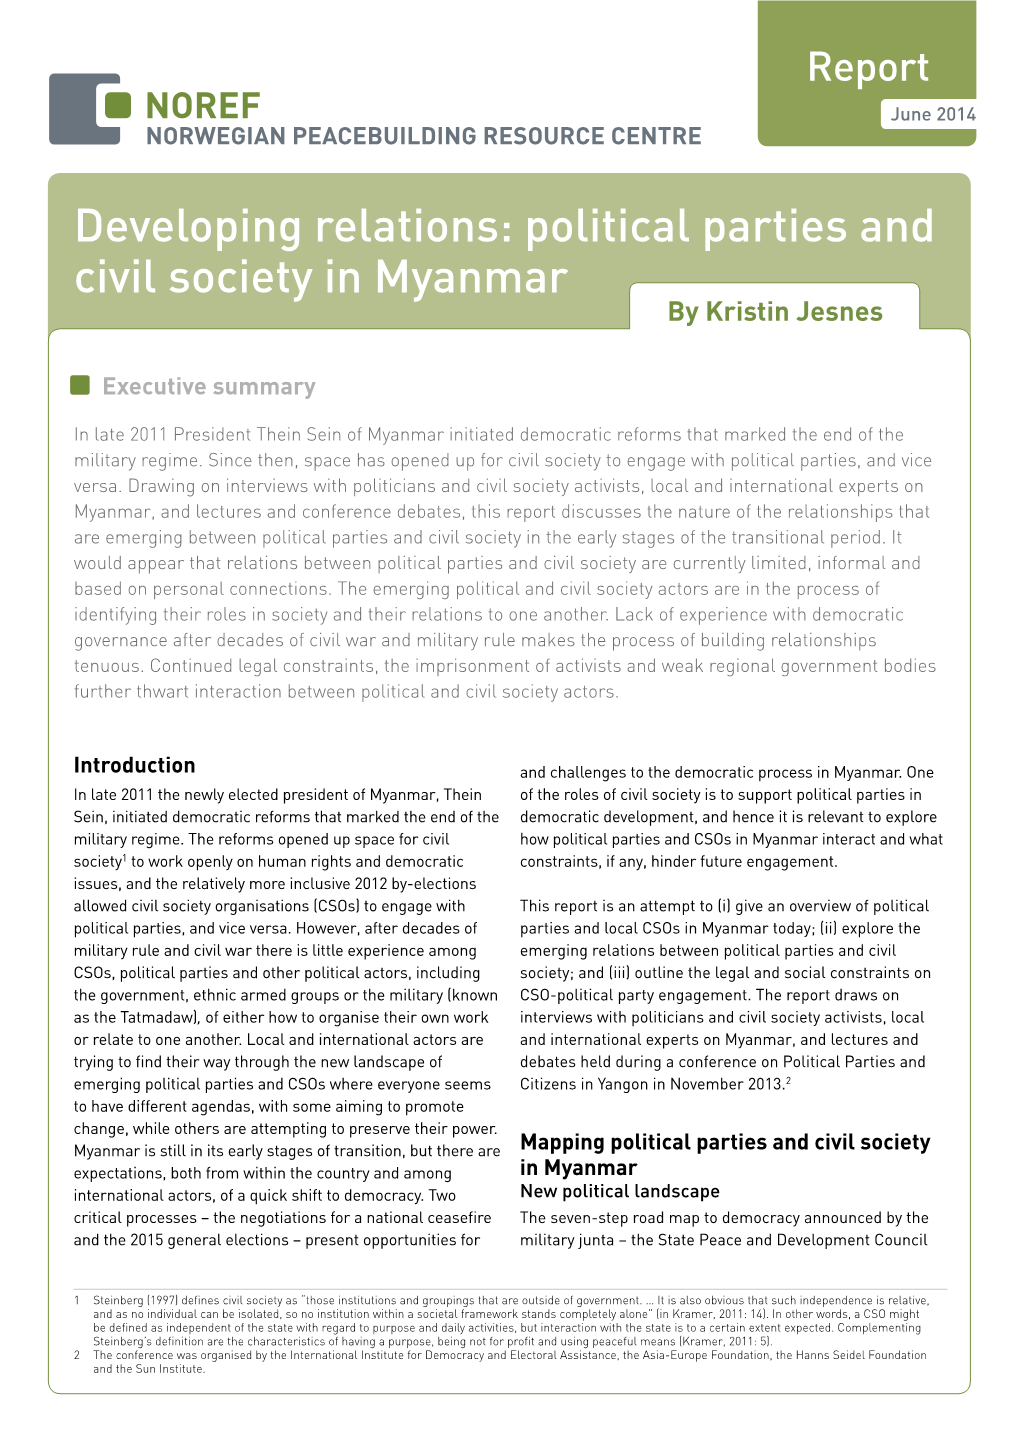 Developing Relations: Political Parties and Civil Society in Myanmar by Kristin Jesnes